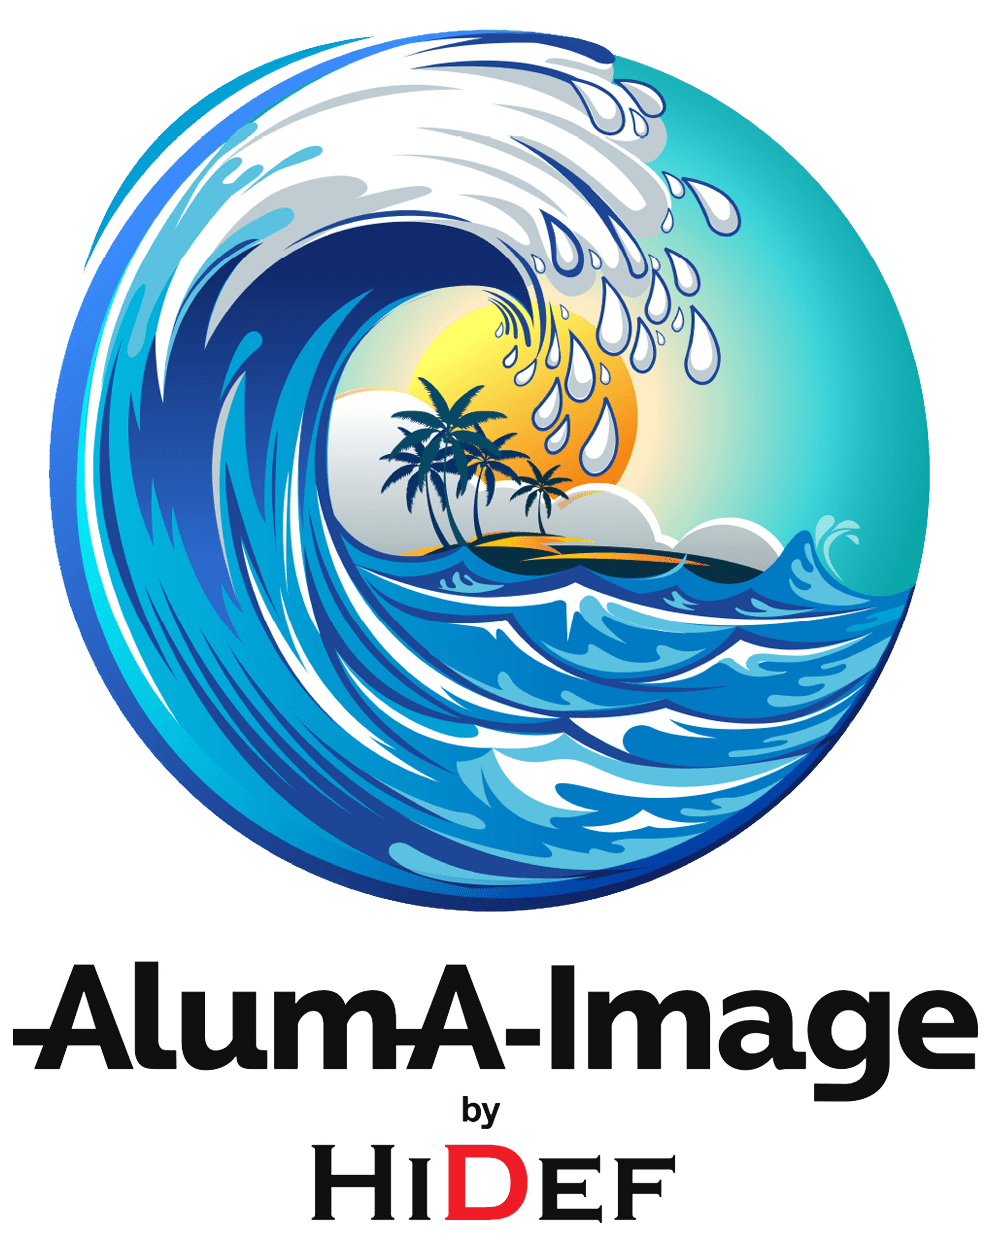 AlumA-Images  By HIDEF